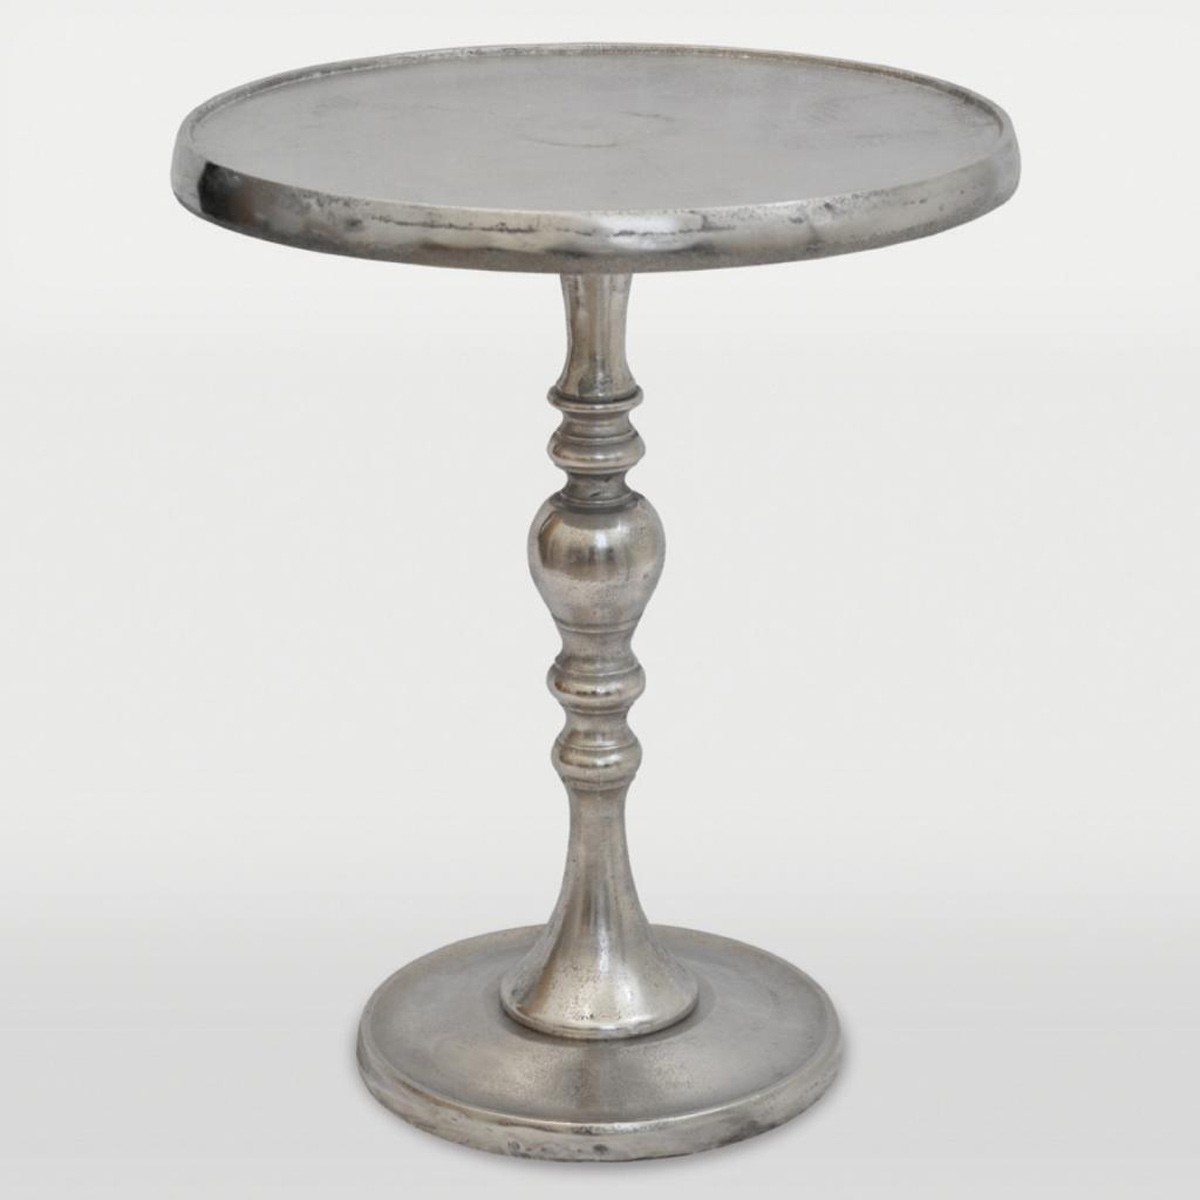 Ren-Wil Romina Accent table - Chrome